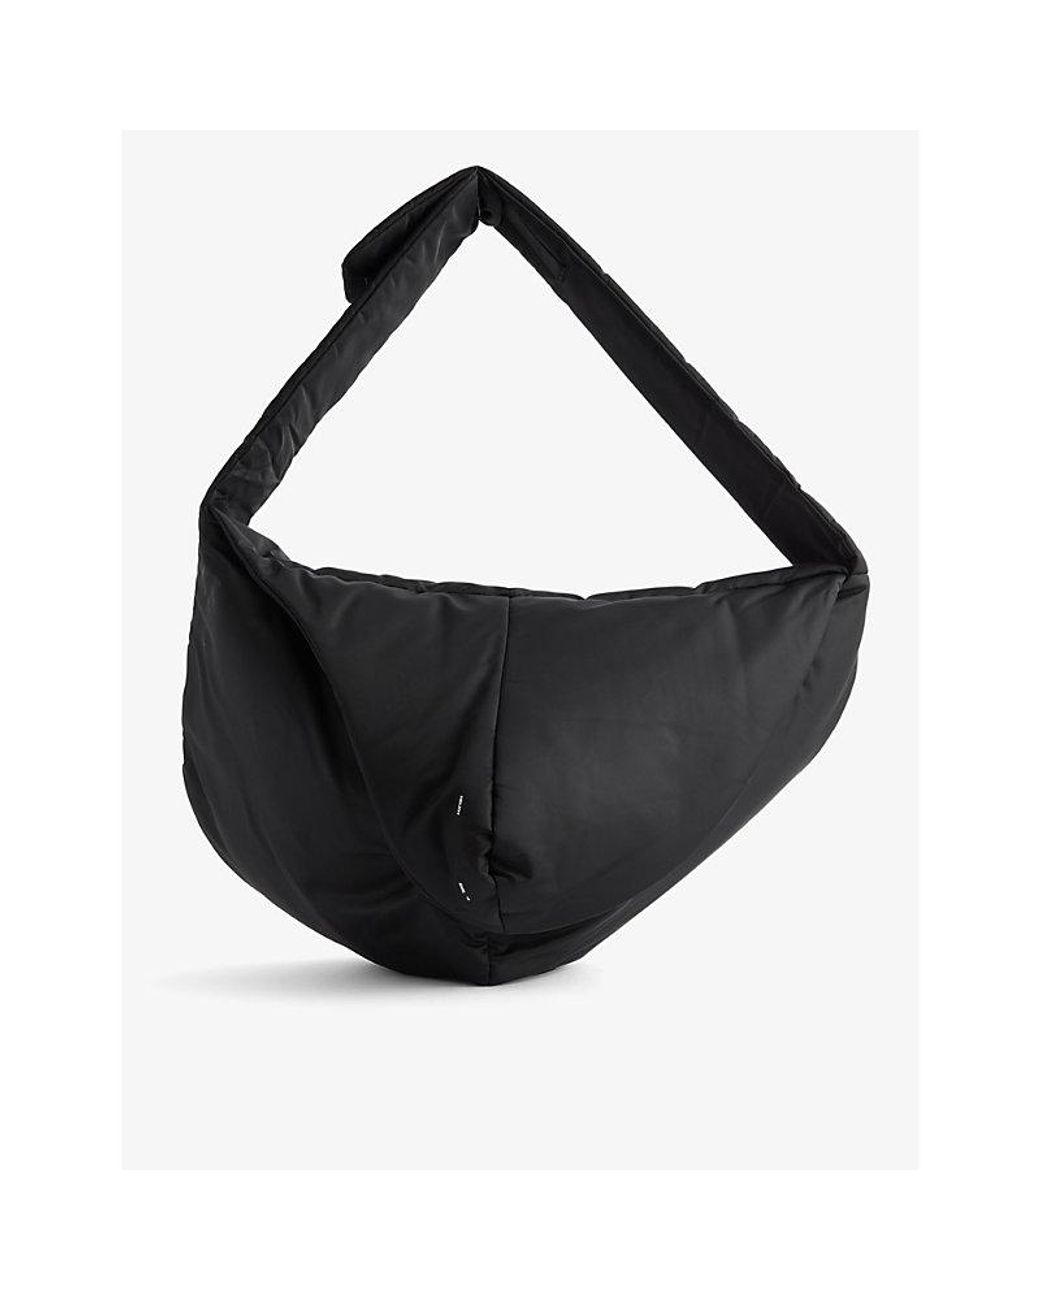 HELIOT EMIL Amorphous Curved Woven Cross-body Bag in Black 